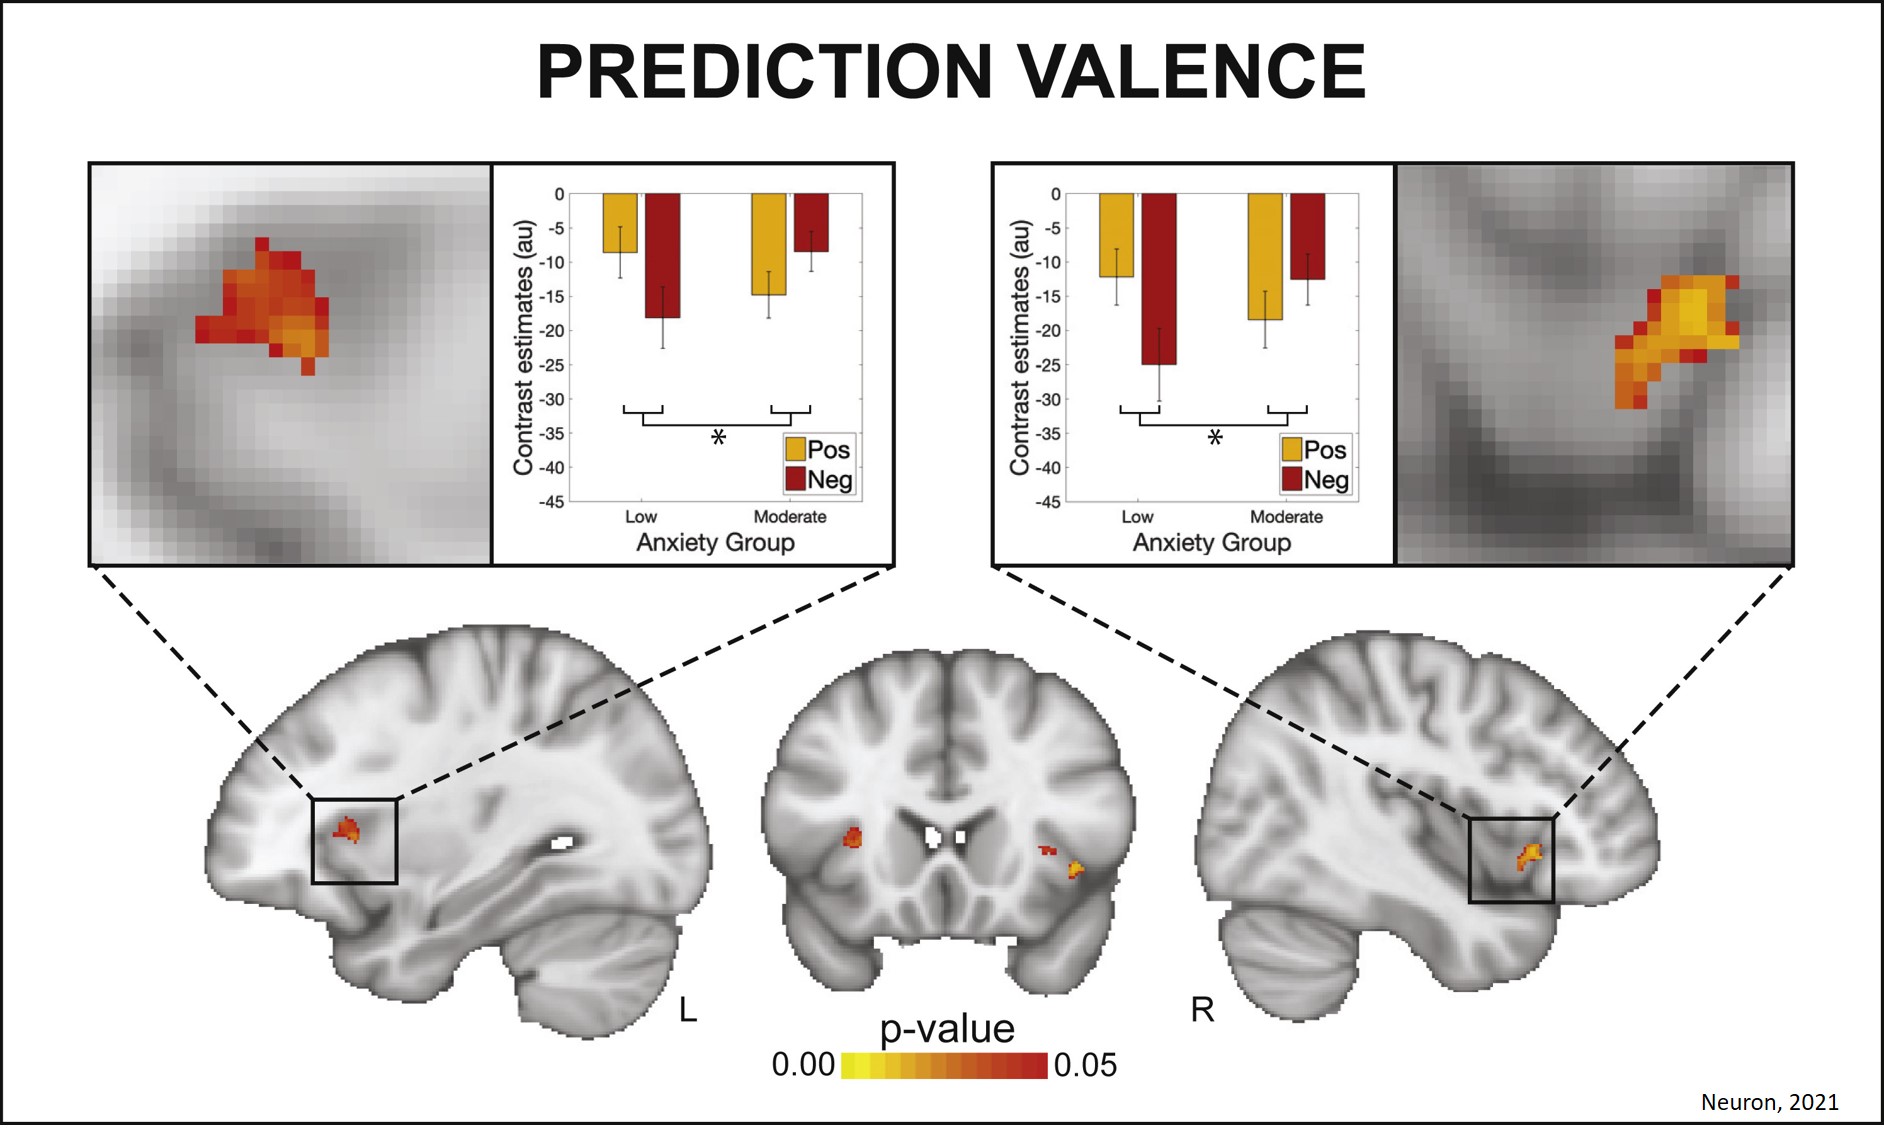 Higher anxiety influence body perception